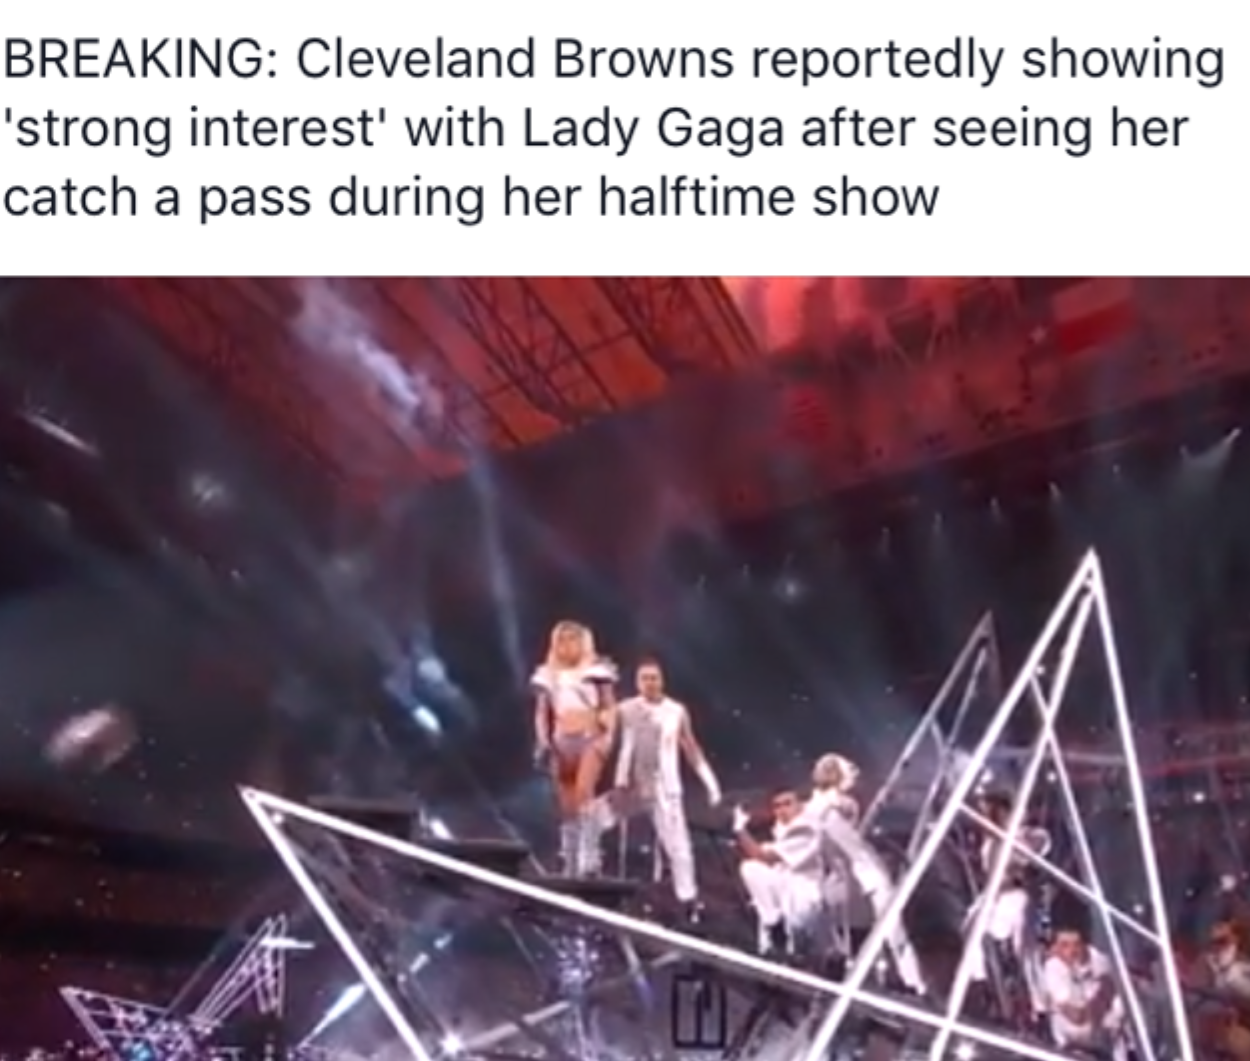 memes - lady gaga super bowl gif - Breaking Cleveland Browns reportedly showing 'strong interest' with Lady Gaga after seeing her catch a pass during her halftime show